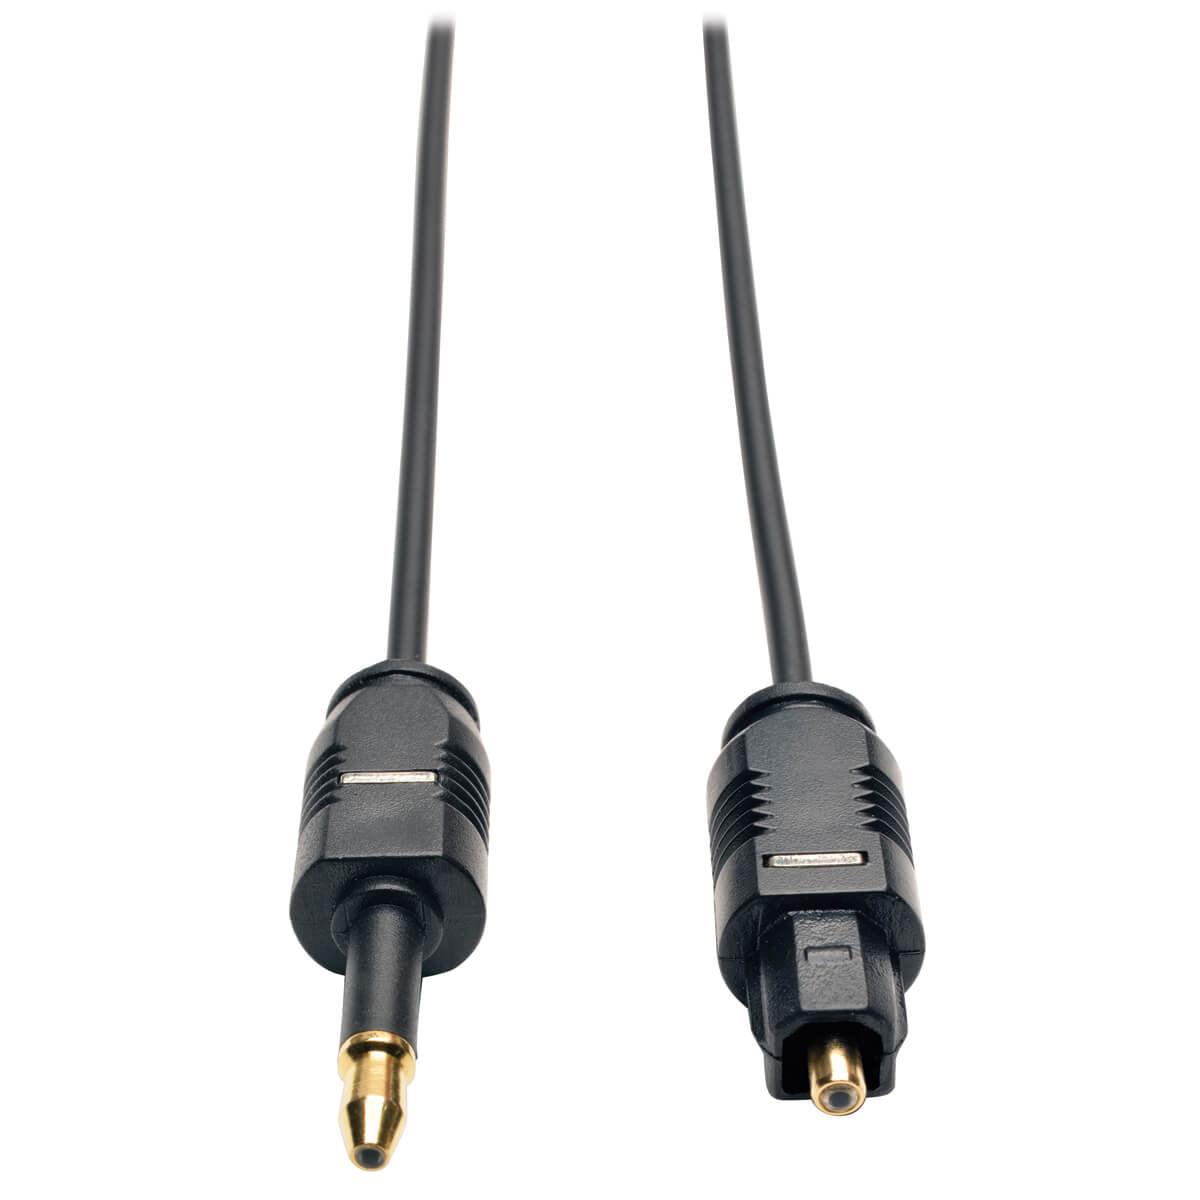 Tripp Lite A104-02M Ultra Thin Toslink To Mini Toslink Digital Optical Spdif Audio Cable, 2M (6.56 Ft.)